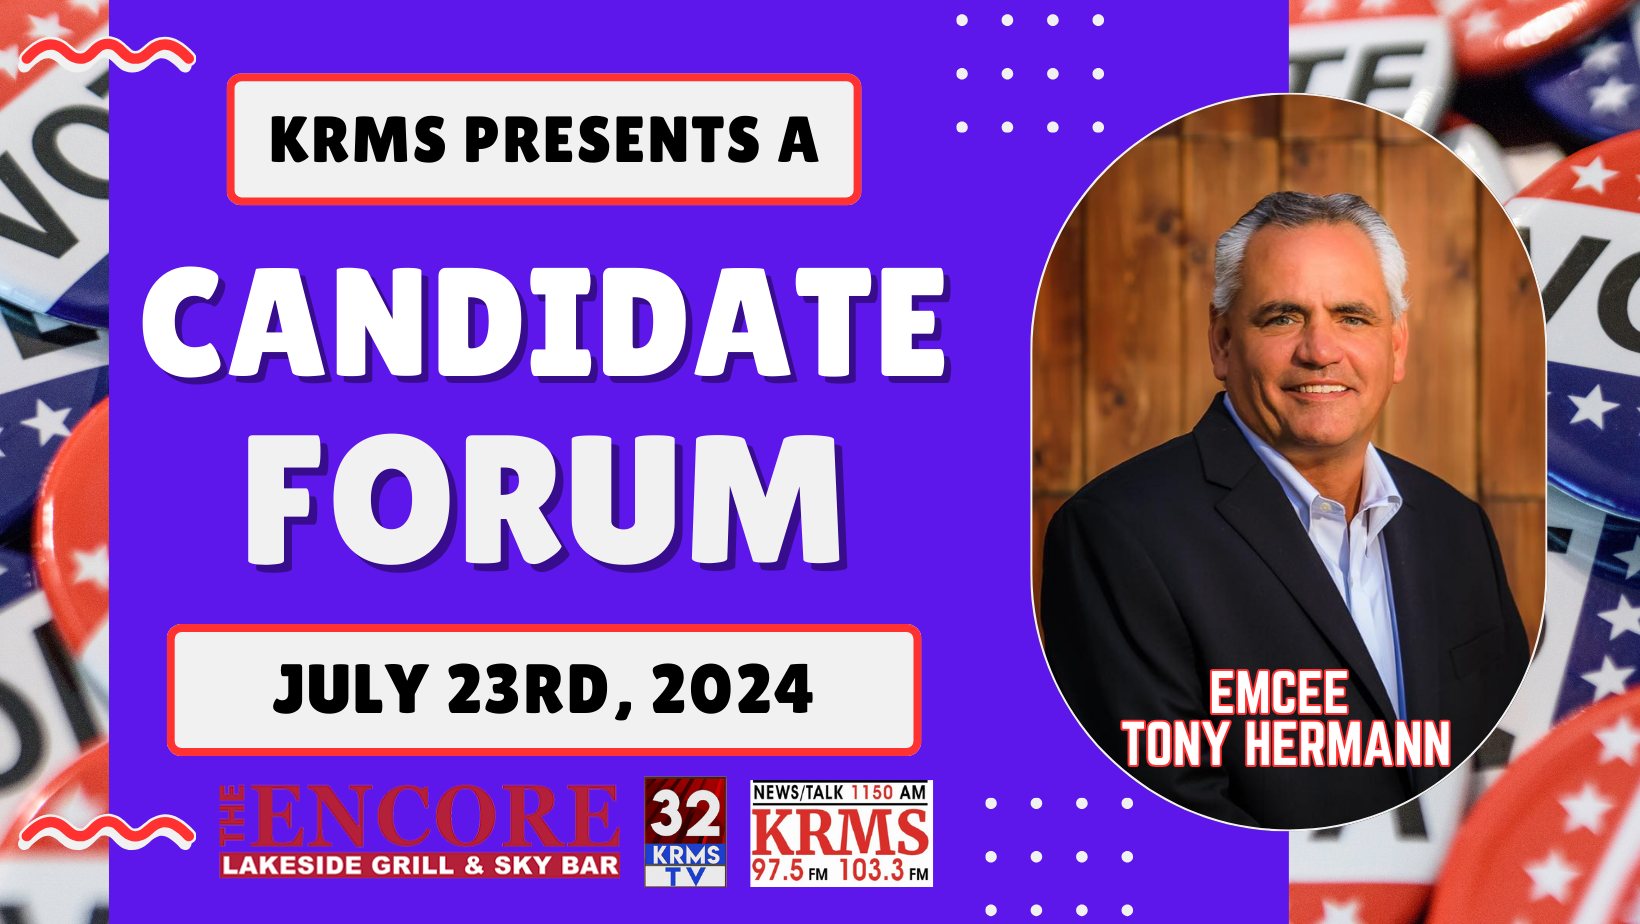 Candidates Forum Tonight In Lake Ozark With KRMS Radio & TV